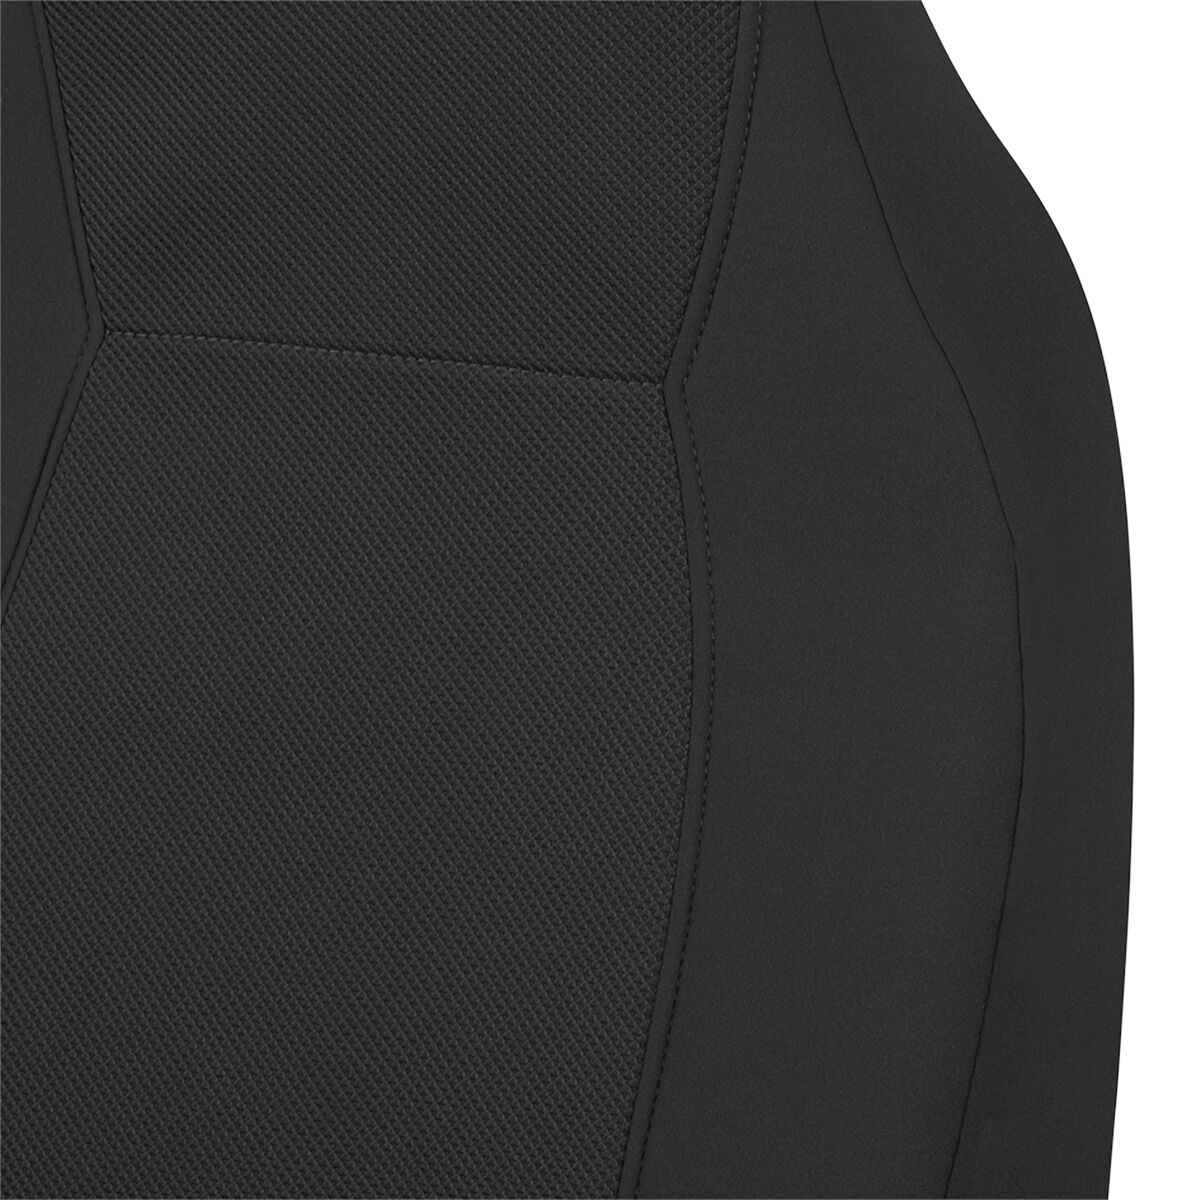 SCA Jacquard Seat Covers Black Built-In Headrests Airbag Compatible, , scaau_hi-res